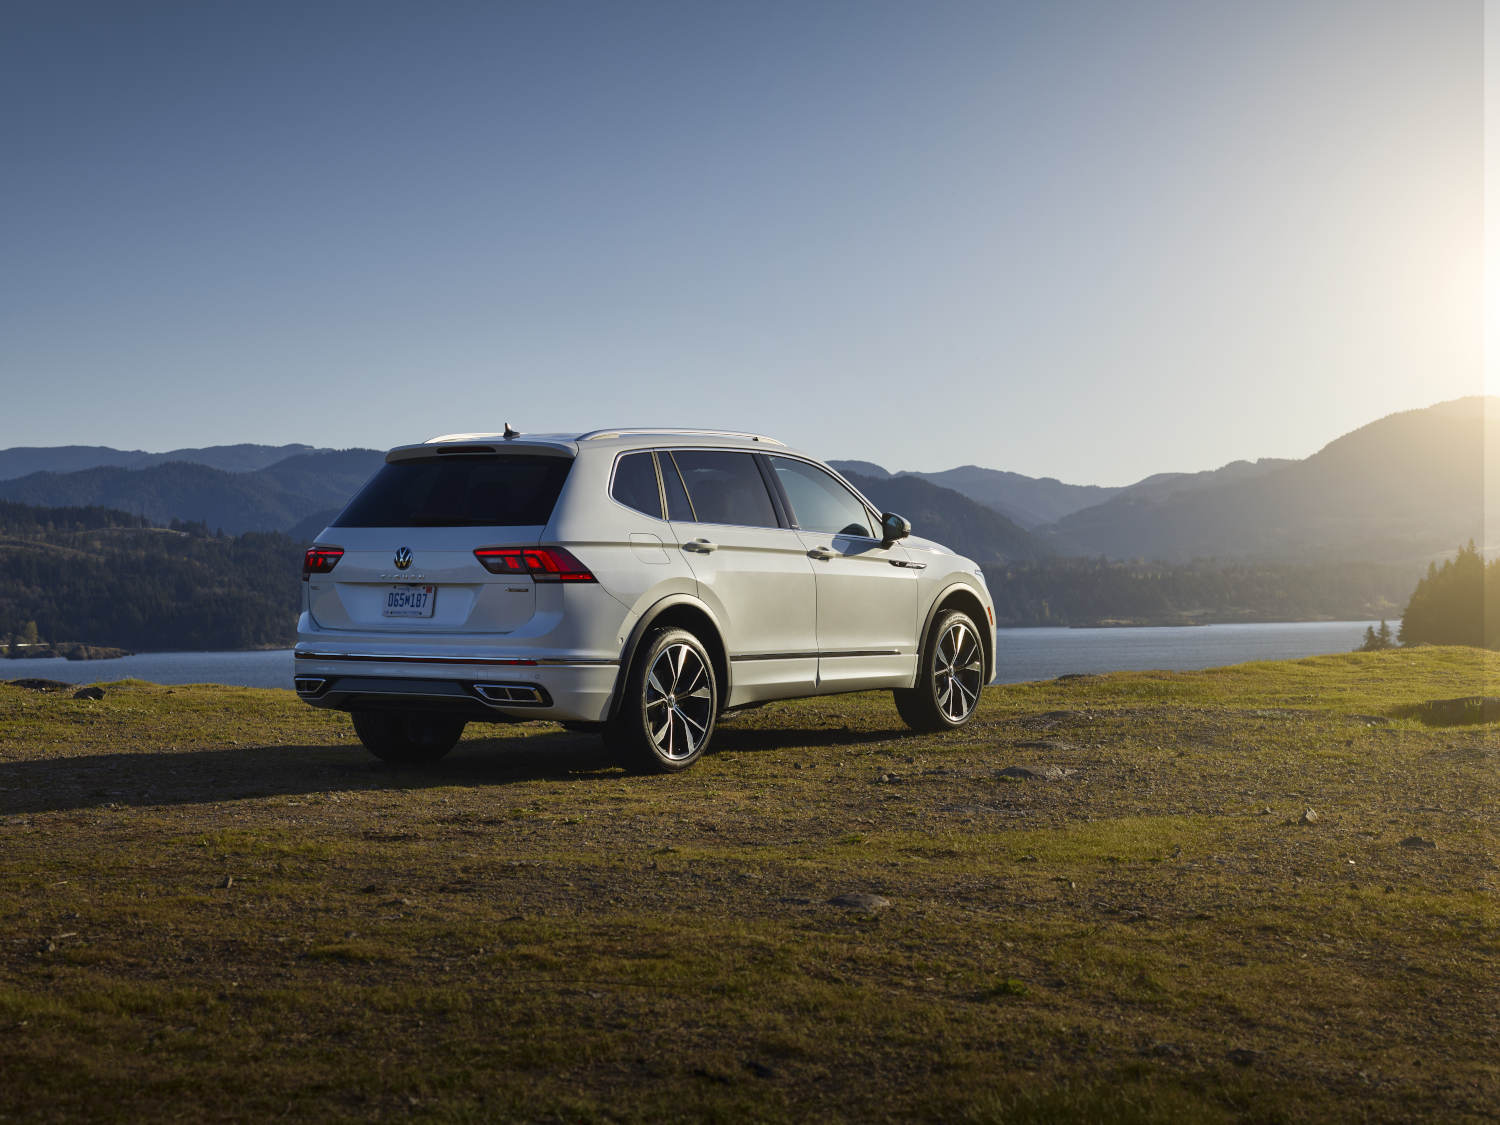 This Volkswagen Tiguan is a good small SUV